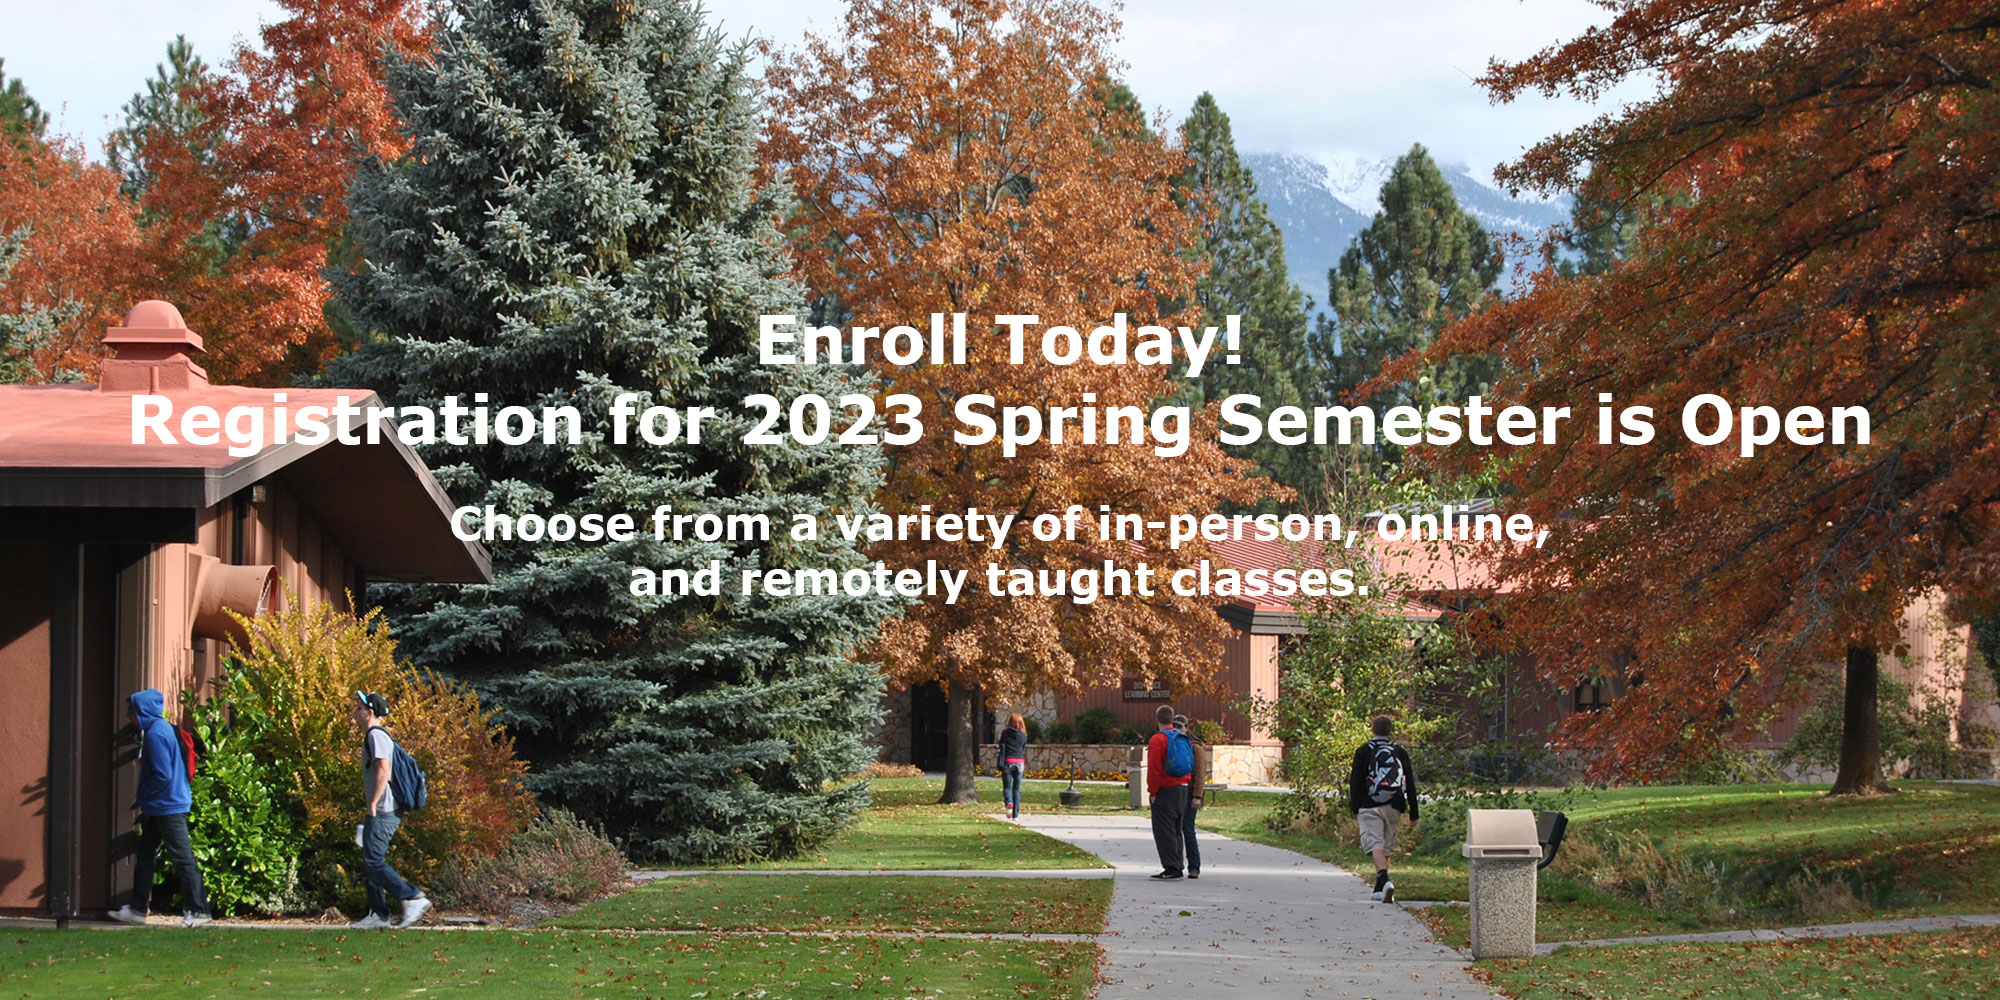 Enroll Today! Registration for 2023 Spring Semester is Open. Choose from a variety of in-person, online, and remotely taught classes.